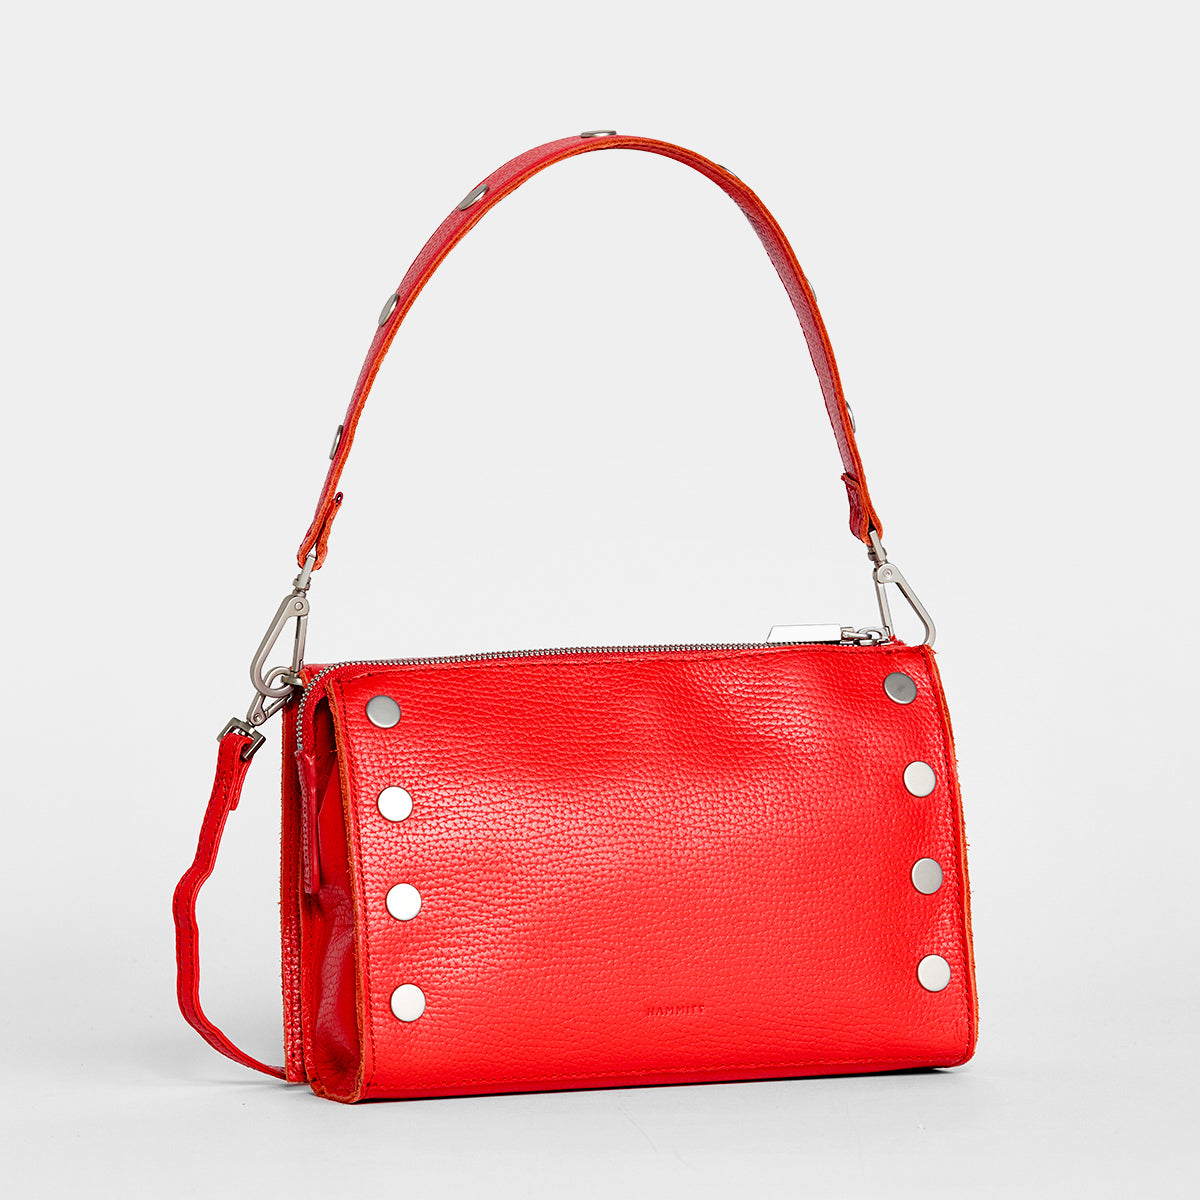 Montana-Clutch-Sml-Lighthouse-Red-Front-Strap-View